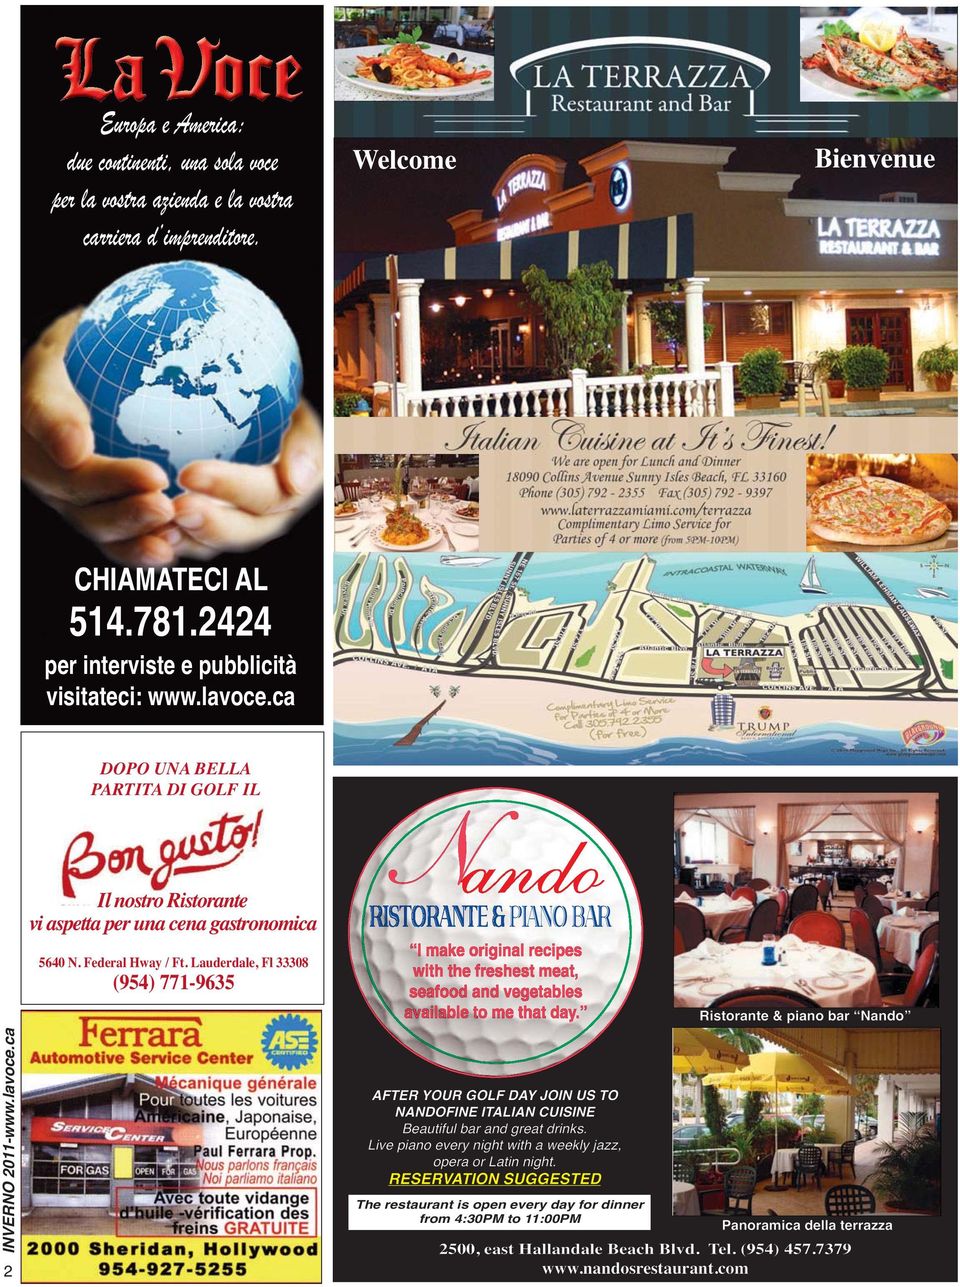 Lauderdale, Fl 33308 (954) 771-9635 N ando RISTORANTE & PIANO BAR I make original recipes with the freshest meat, seafood and vegetables available to me that day.